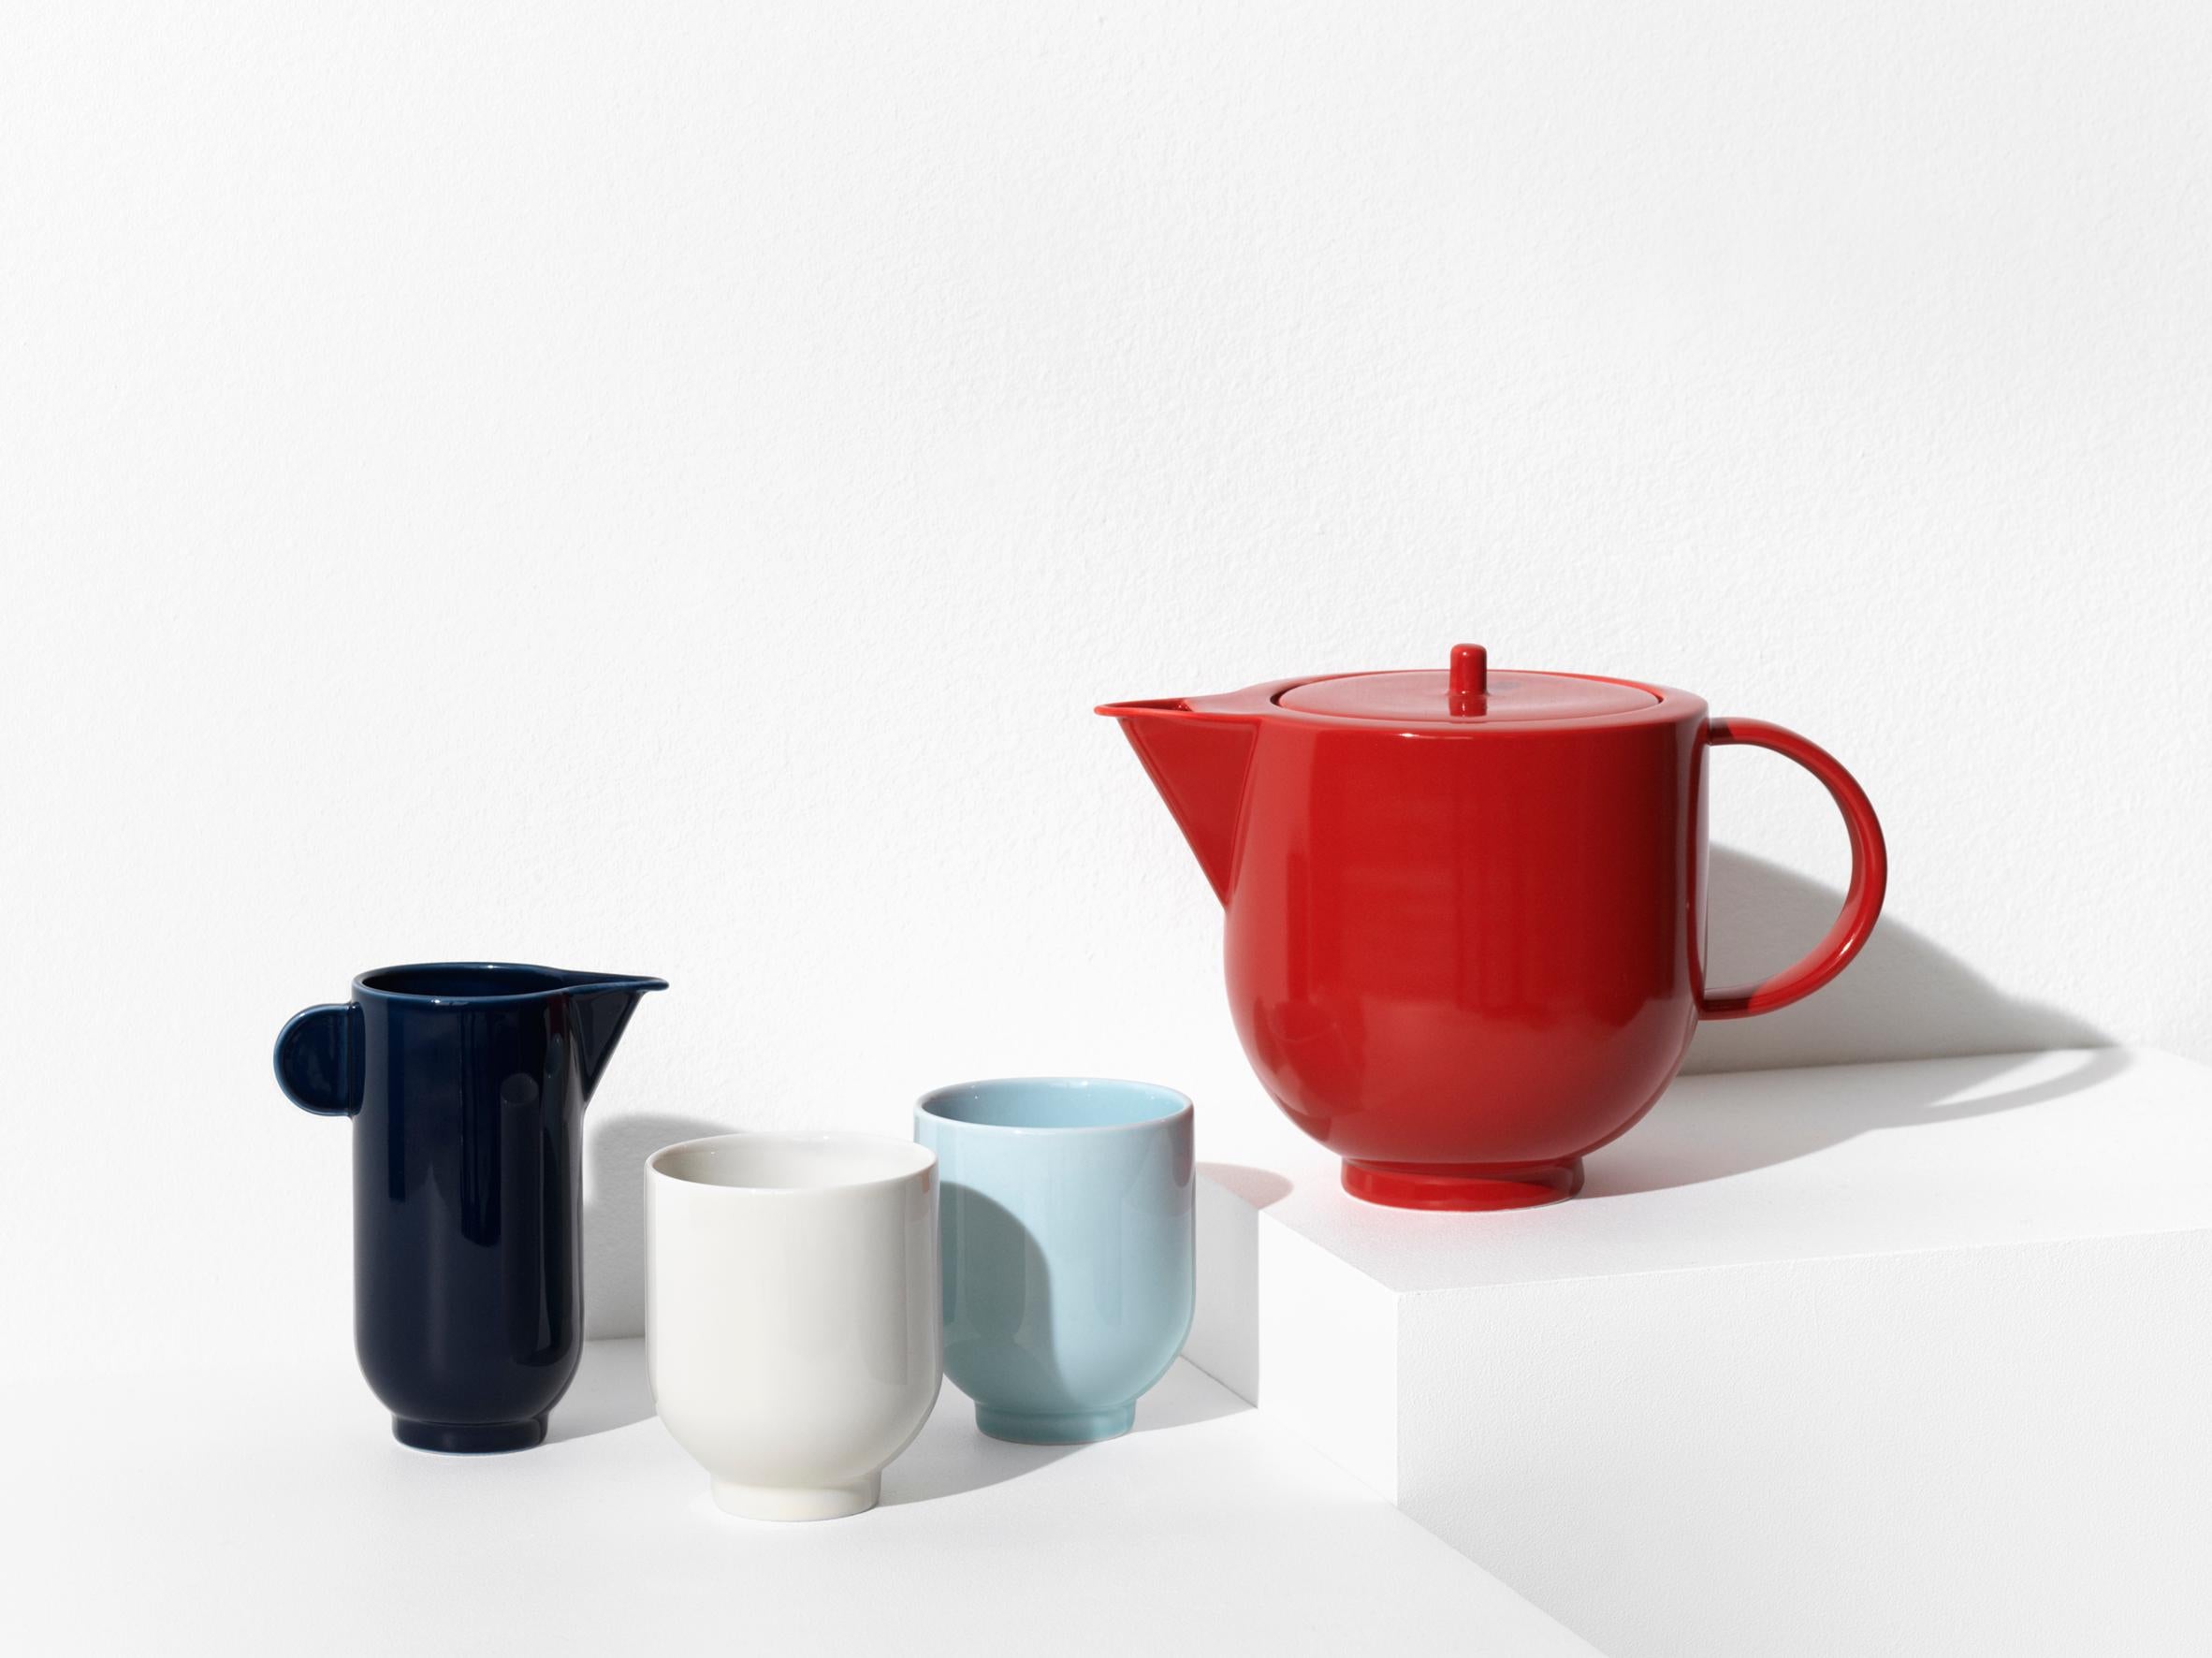 The YOKO pitcher is a significant and distinctive piece of tableware. Its simple, sculptural shape with strong, sharp edges challenges the soft material of porcelain.

The pitcher is available in eggshell white and dark navy blue. It contains